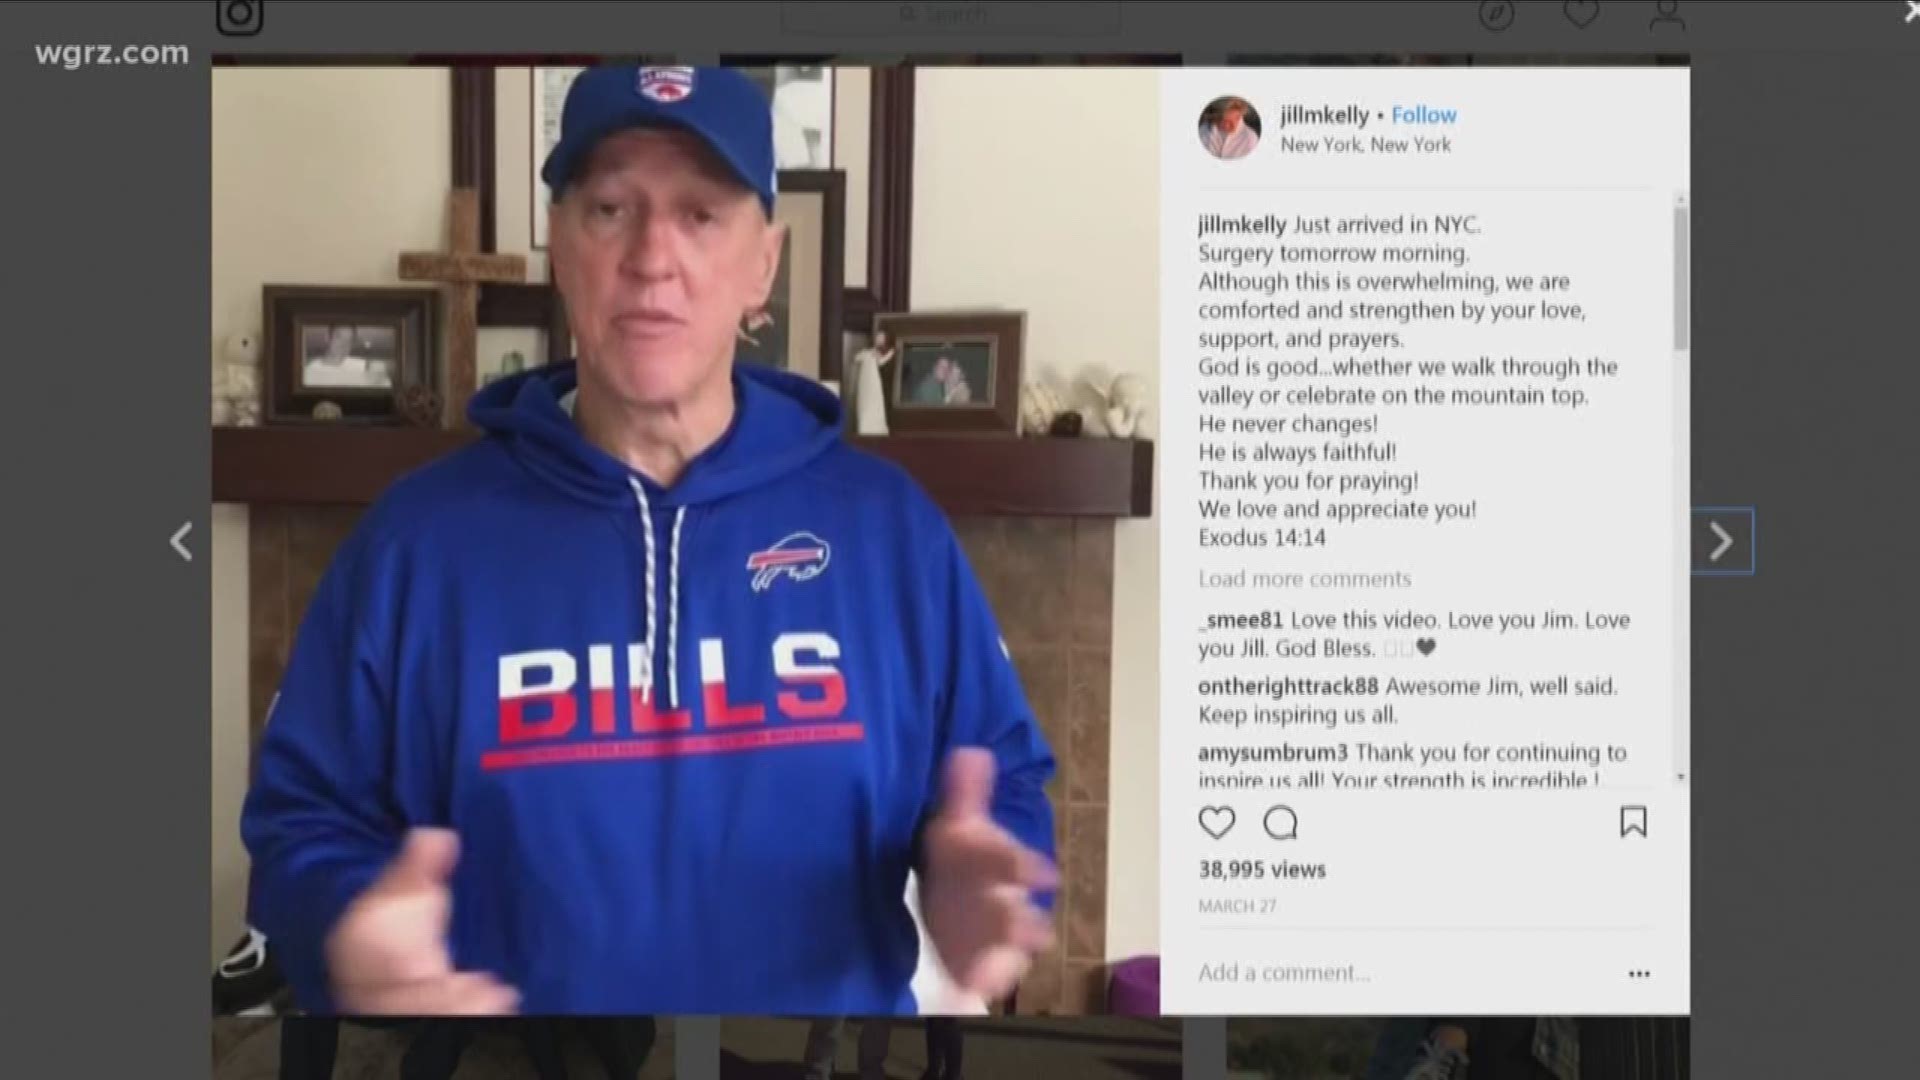 Jim Jim Kelly is set to come home from New York City Wednesday after receiving treatment for oral cancer.